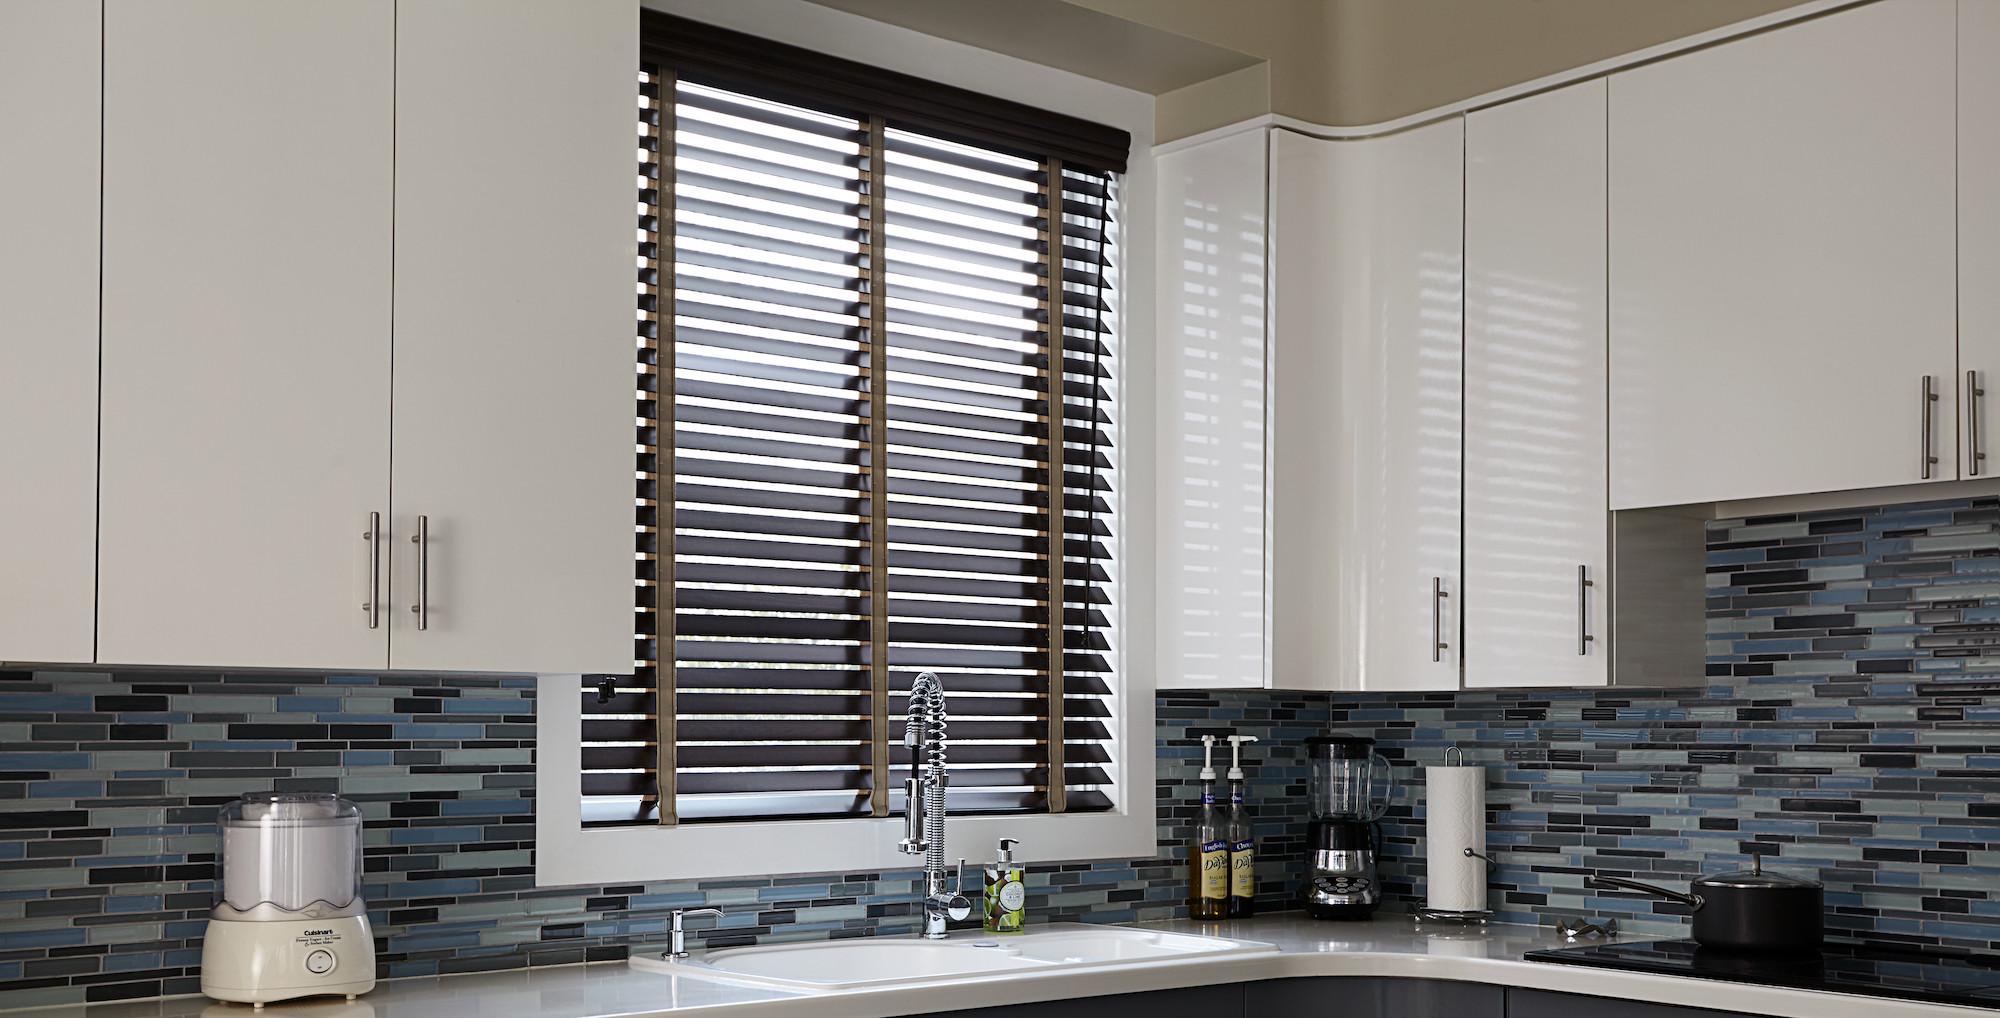 A kitchen window features real wood blinds in a dark brown finish with contrasting tan fabric tape